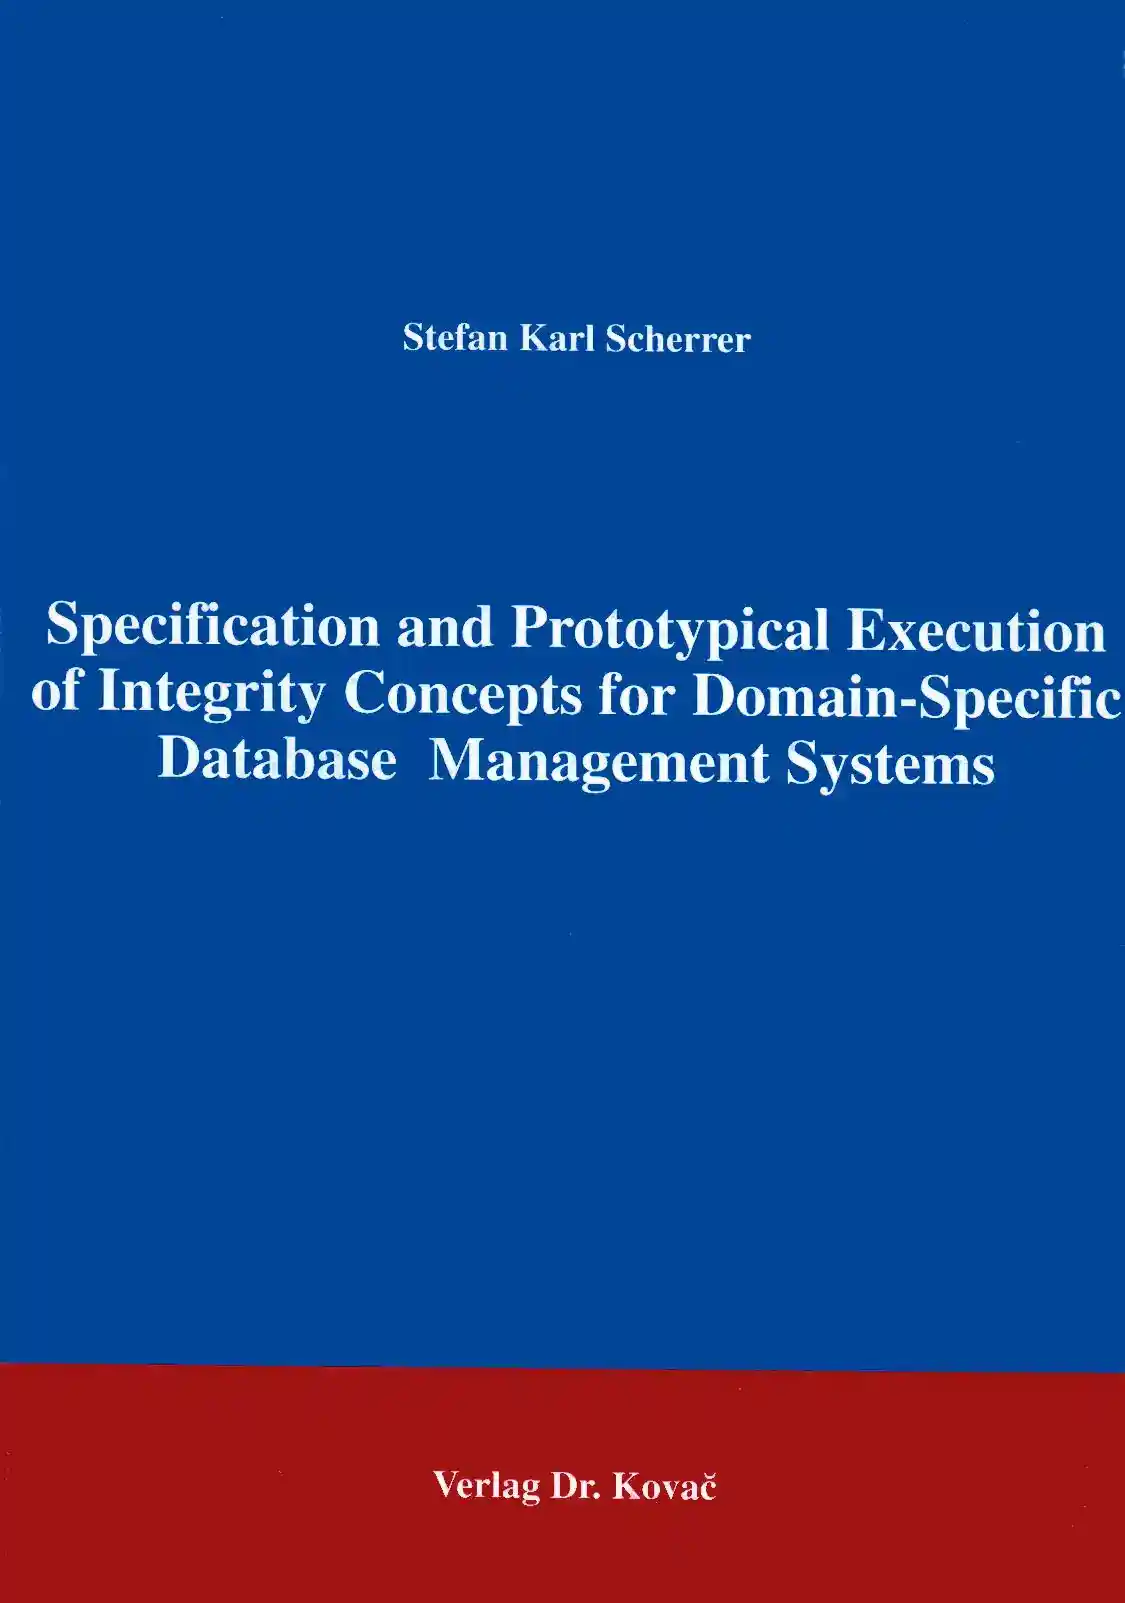  Forschungsarbeit: Specification and Prototypical Execution of Integrity Concepts for DomainSpecific Database Management Systems